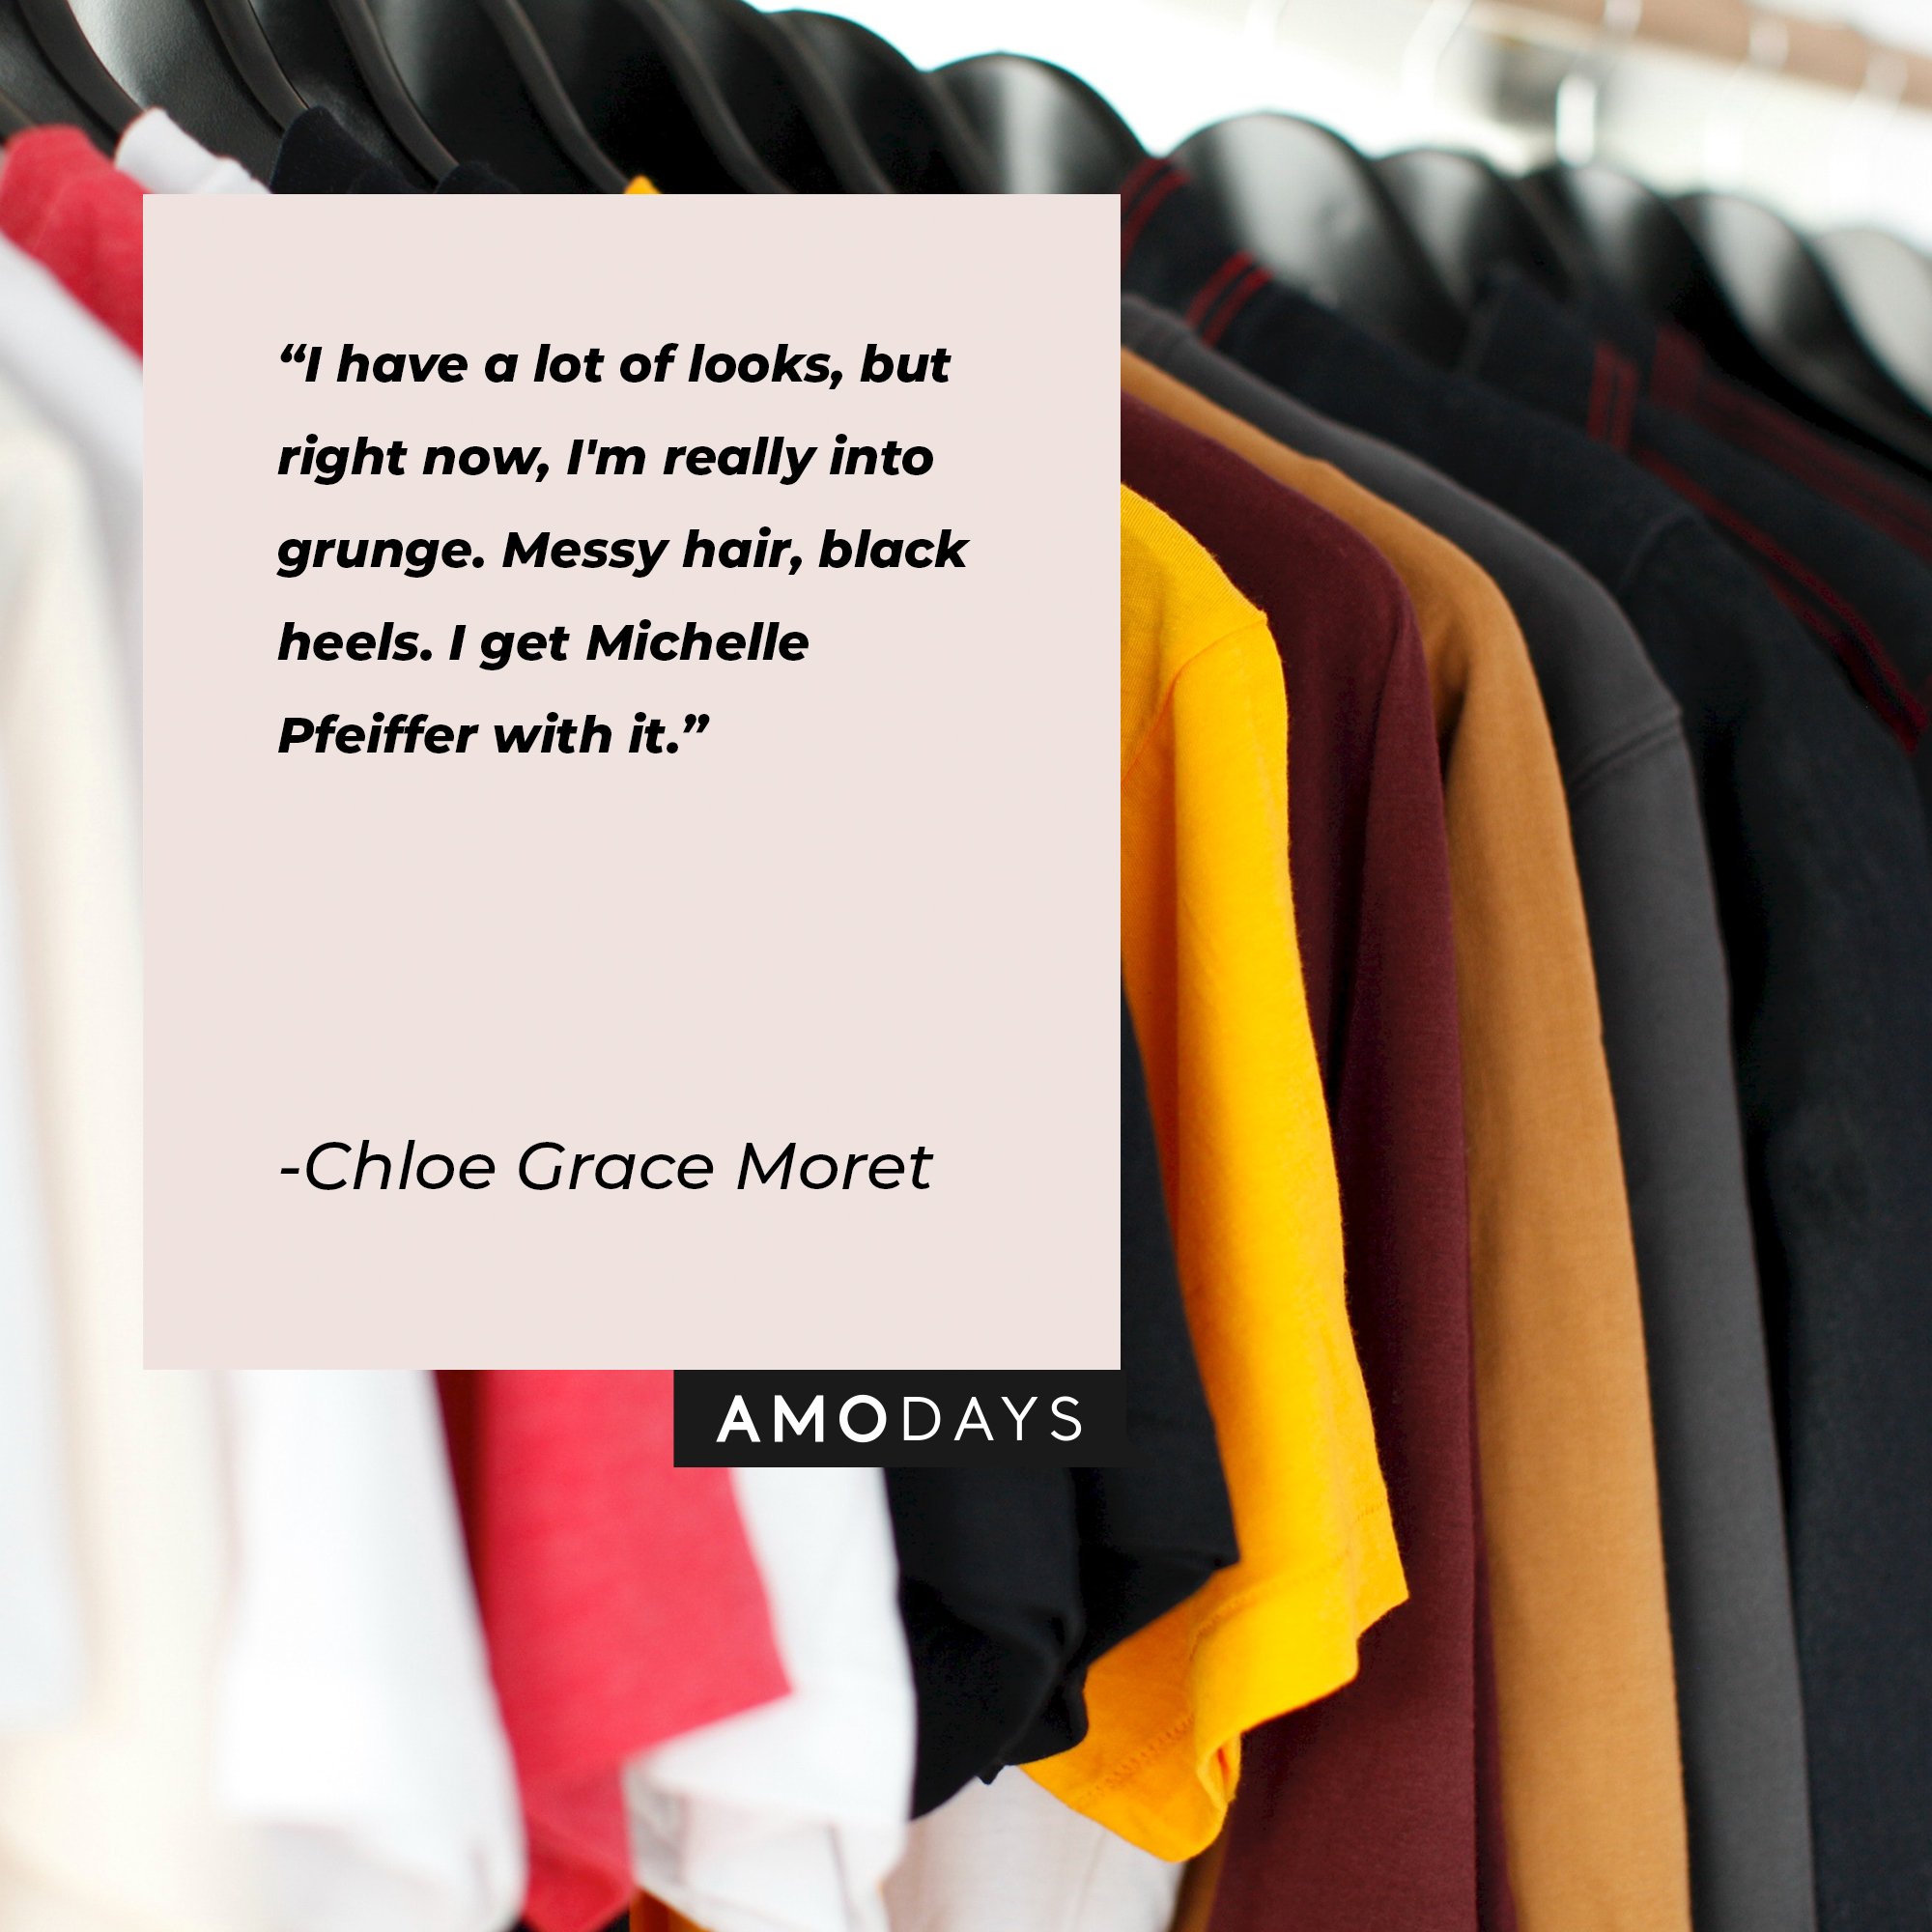 Chloe Grace Moret’s quote: "I have a lot of looks, but right now, I'm really into grunge. Messy hair, black heels. I get Michelle Pfeiffer with it." | Image: AmoDays